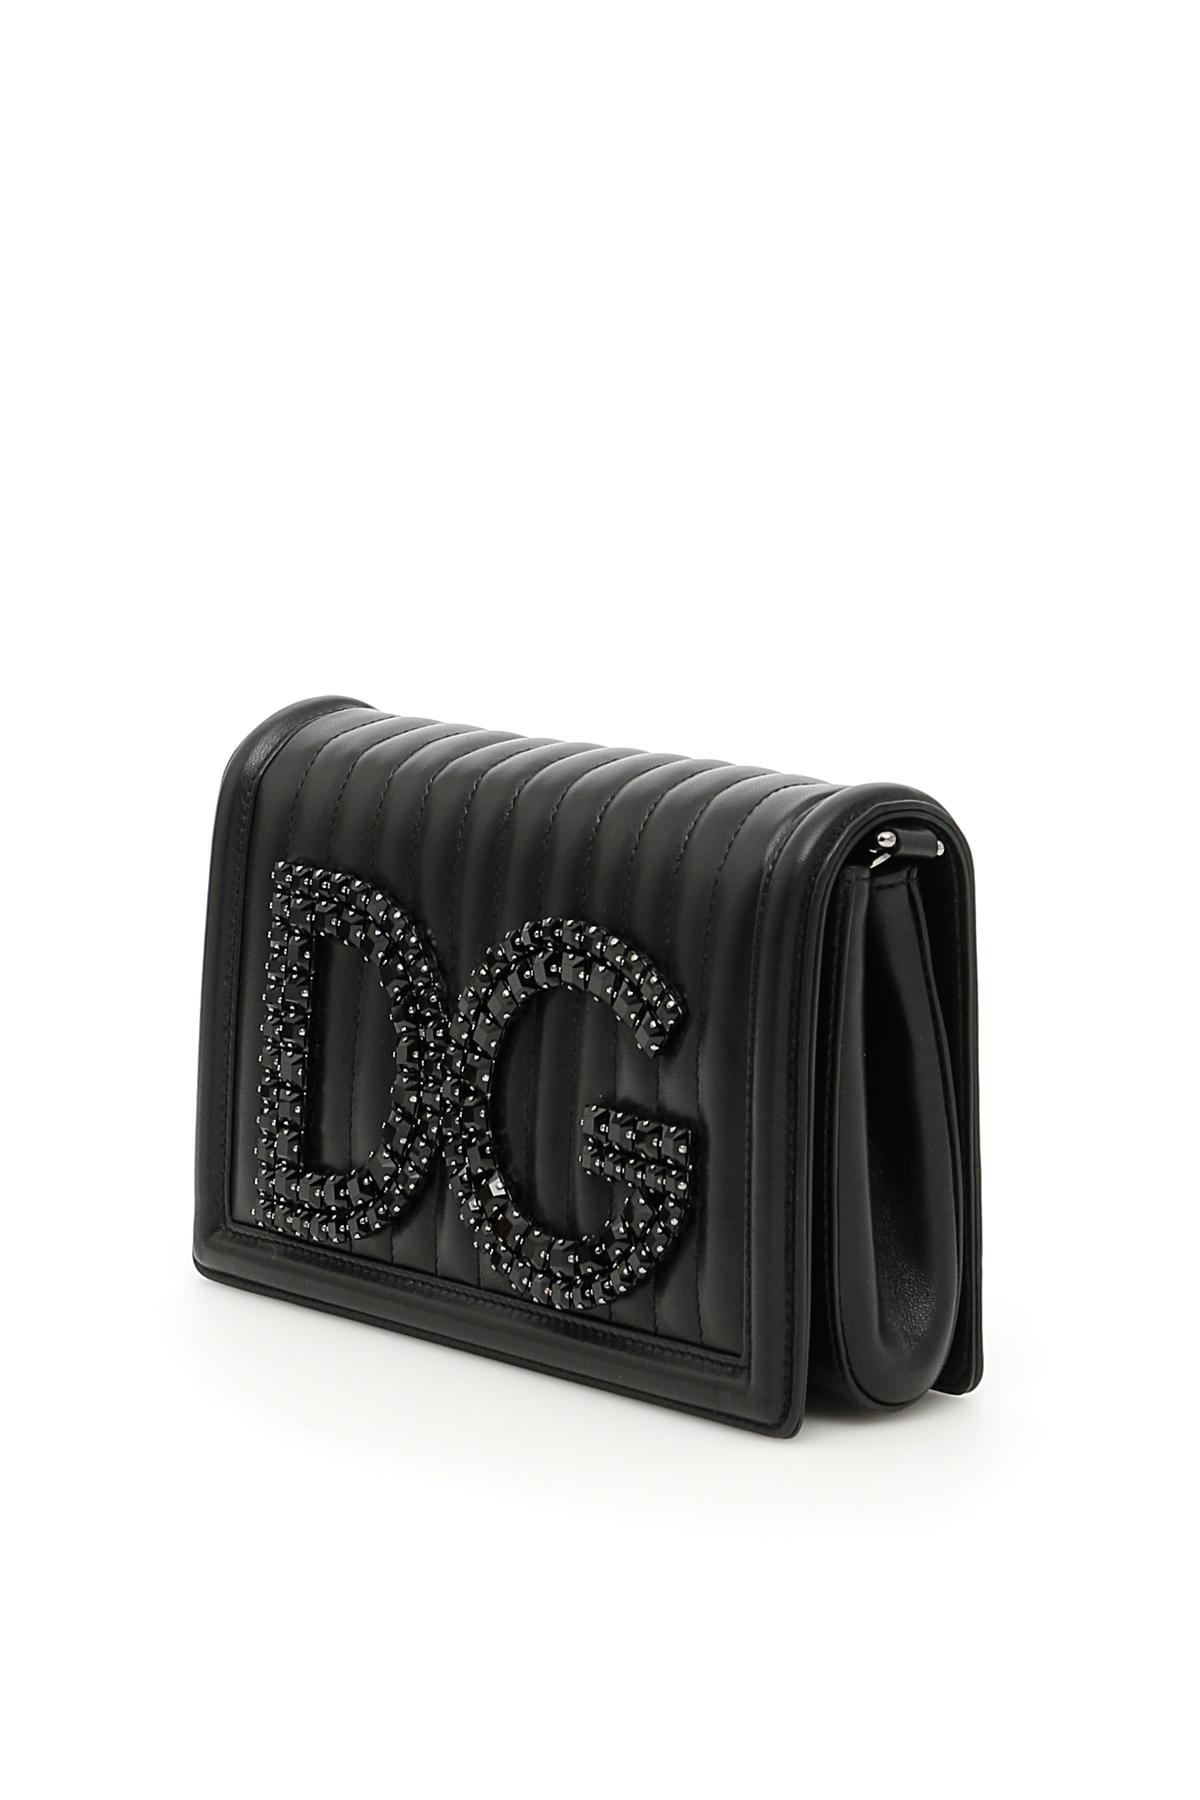 Dolce \u0026 Gabbana Leather Quilted Nappa 